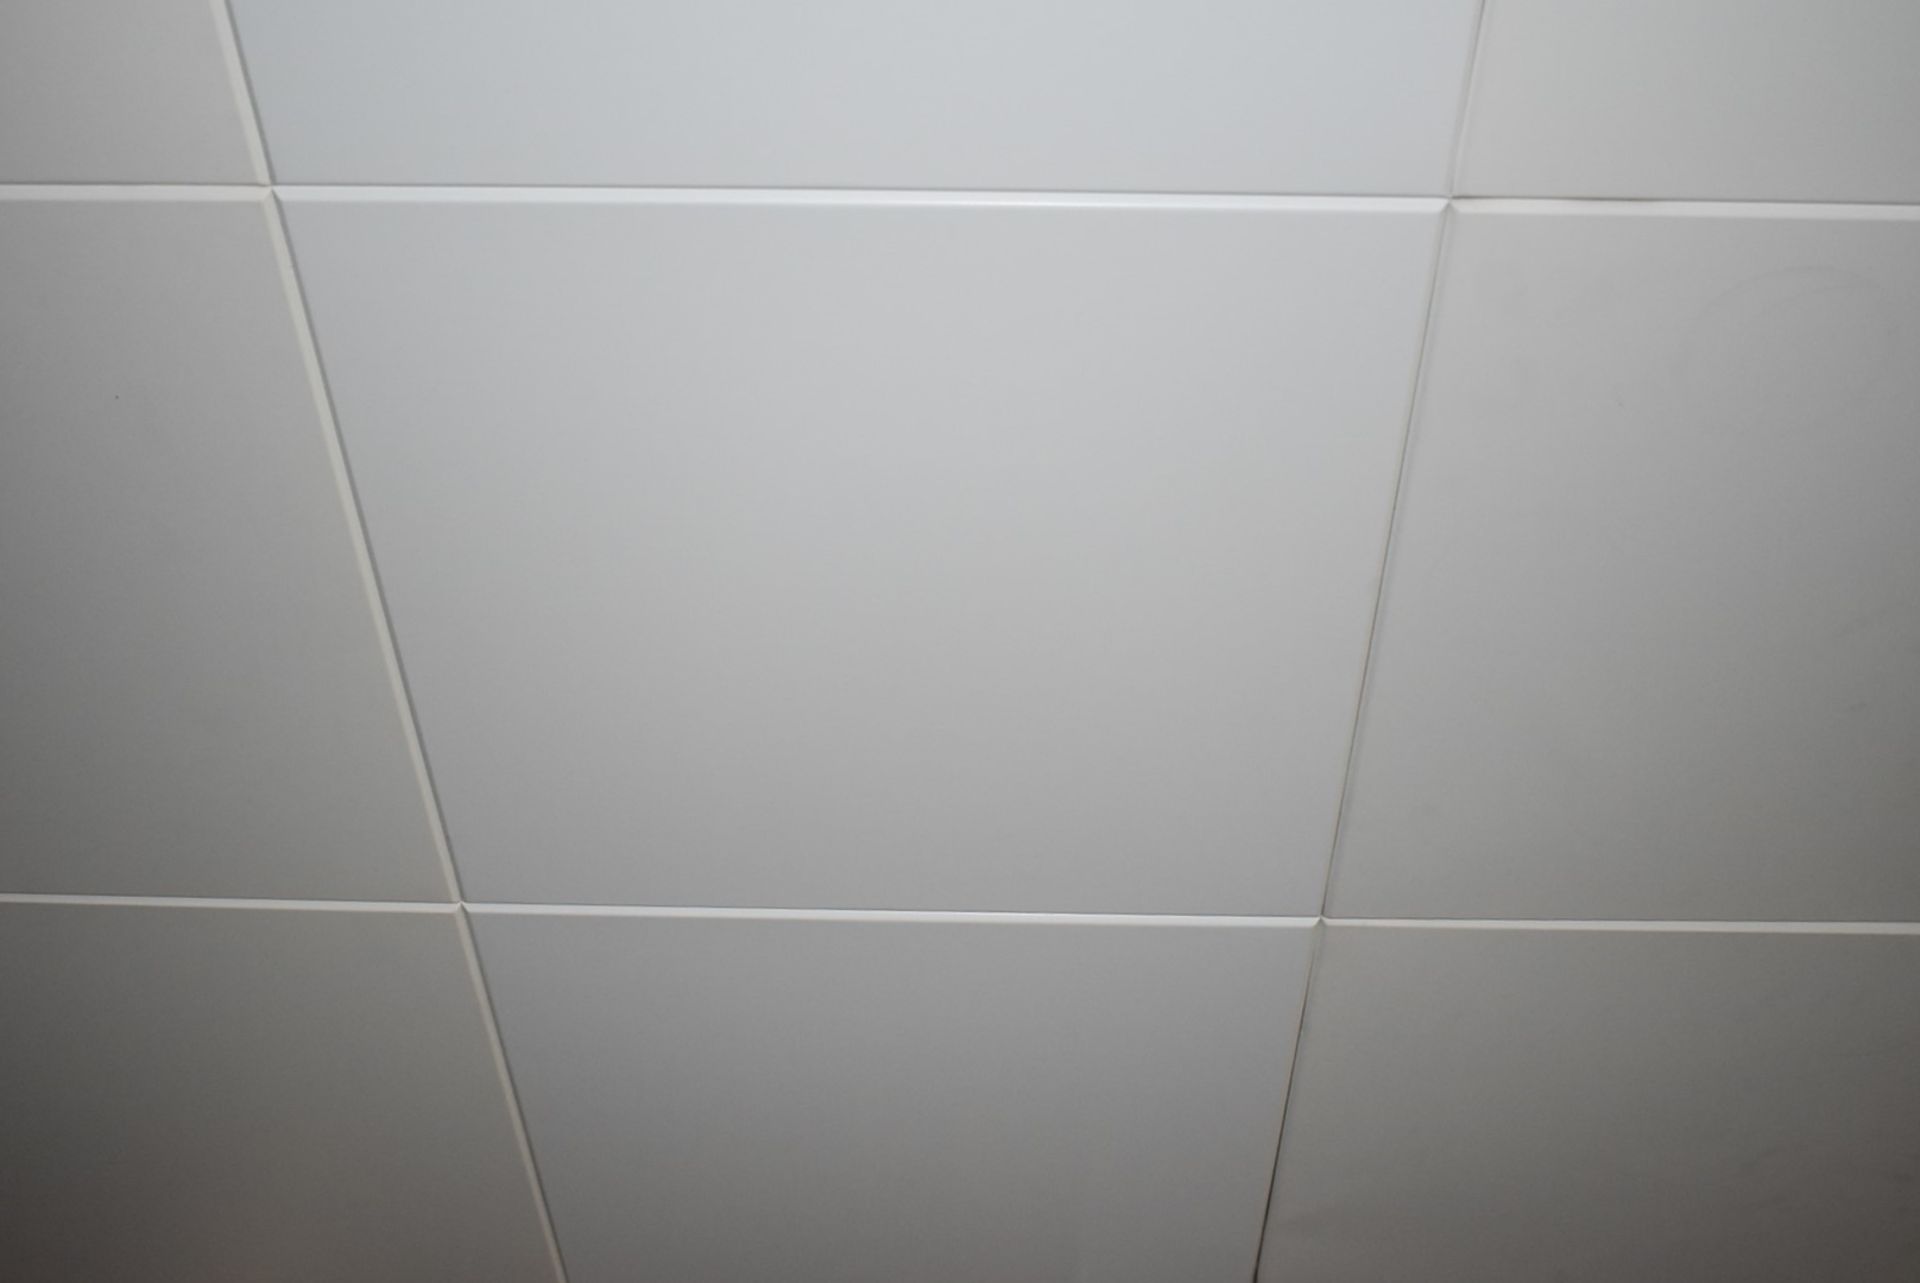 Approx 1,200 x White Metal Office Ceiling Panels - Each Panel Measures 60 x 60 cms - CL529 - - Image 4 of 6